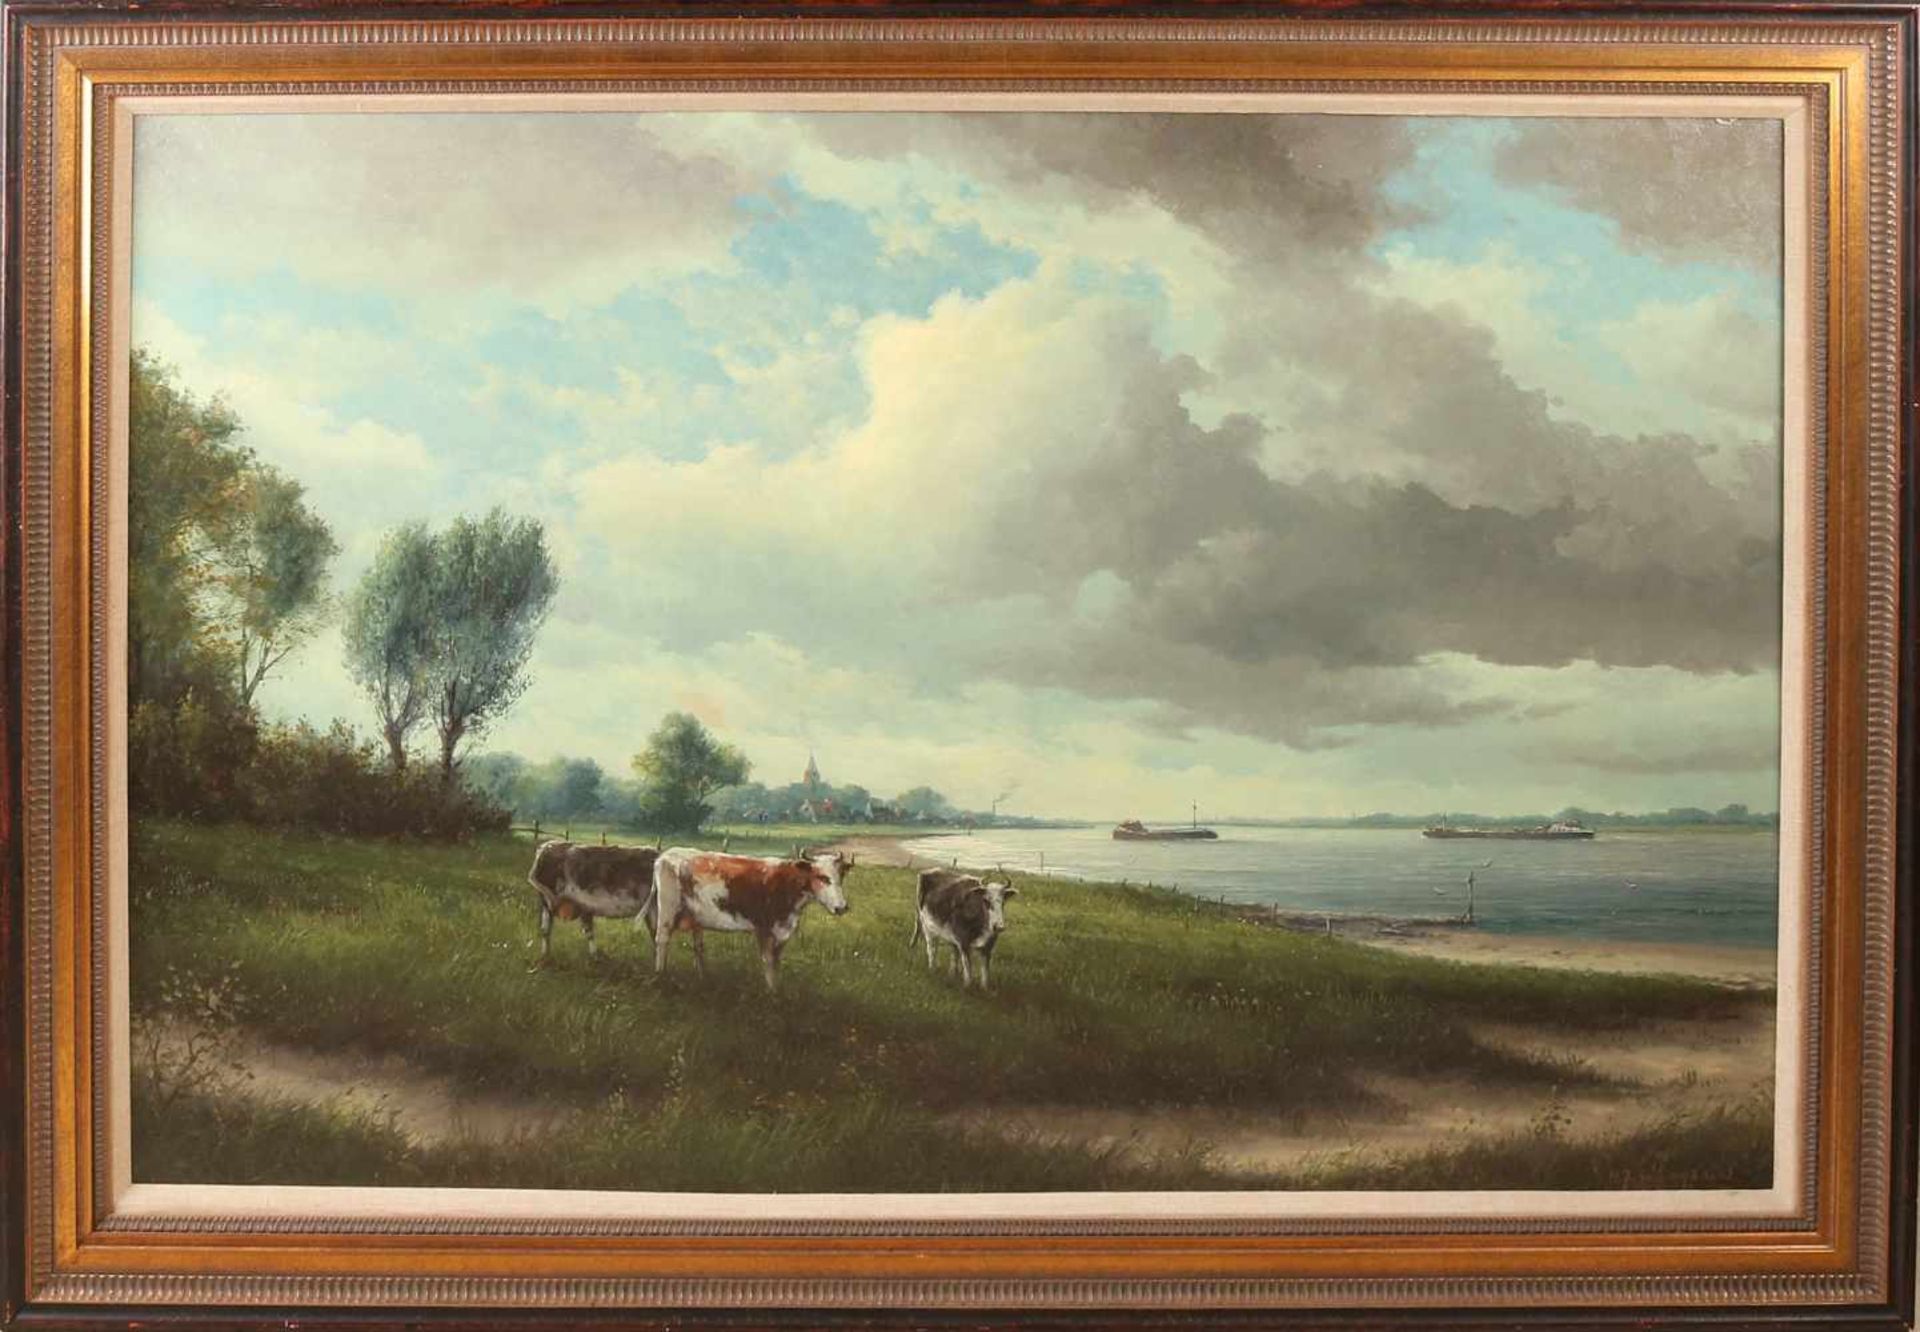 Joseph Herman Vineyard 1922 to 2012. Ijssel Face with cows along the shore. oil on canvas. 80x120 cm